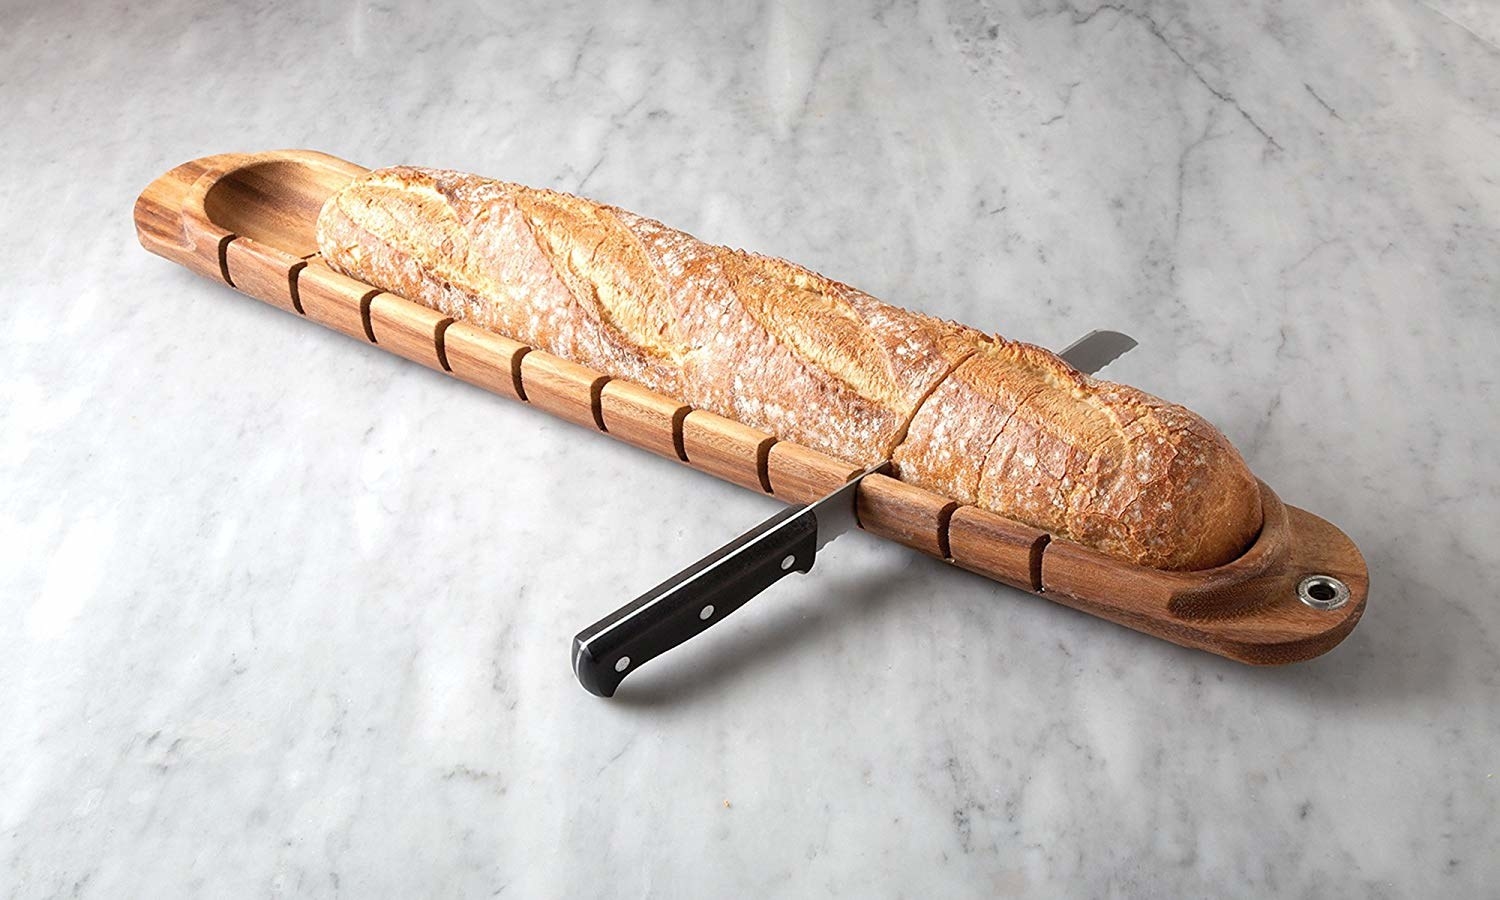 A knife slicing through a baguette on the miter